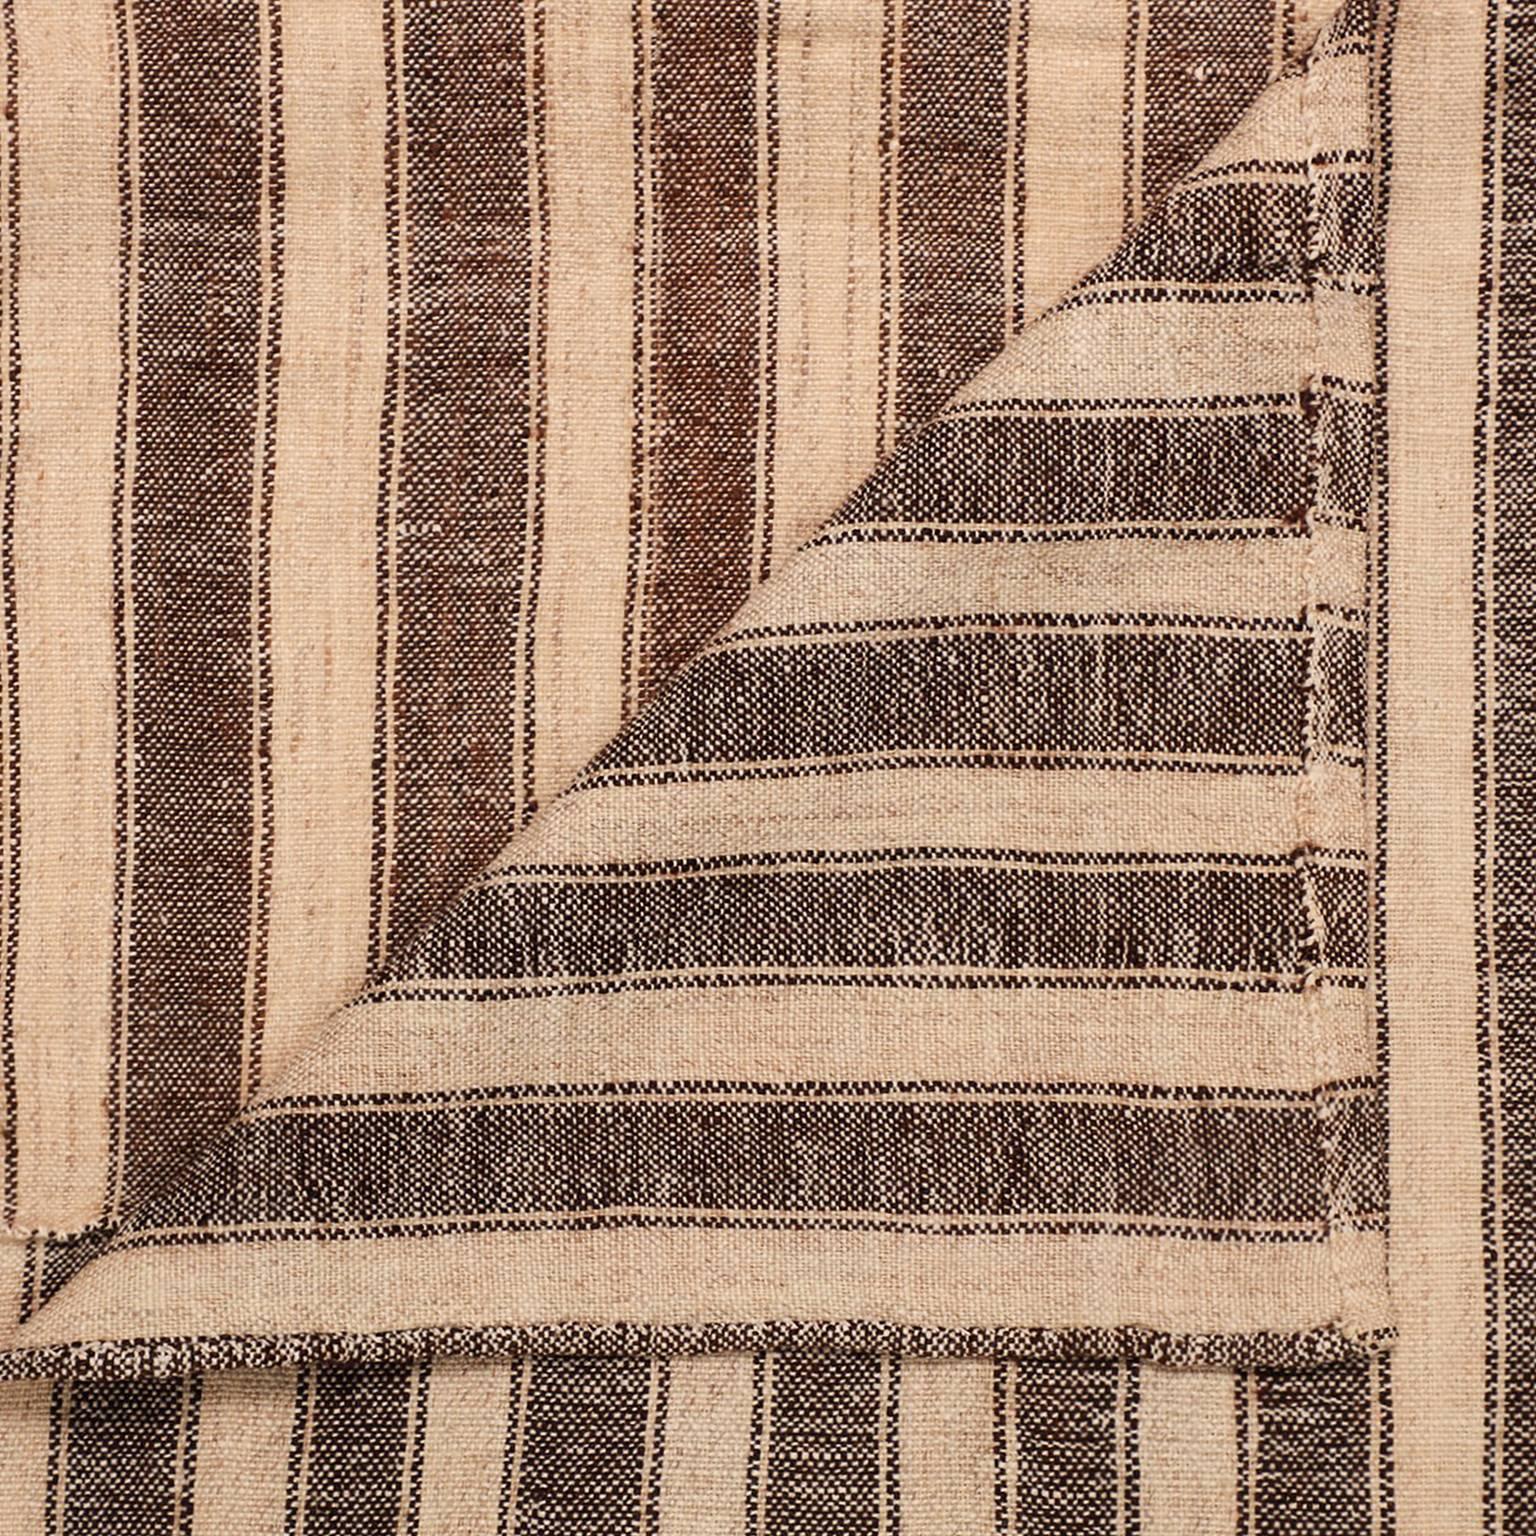 Individually woven panels in contrasting stripes are hand-stitched together to create an unexpected and large-scale composition. 

This vintage rug has its own distinctions and imperfections. Minor wear, flaws and discolorations may be expected,